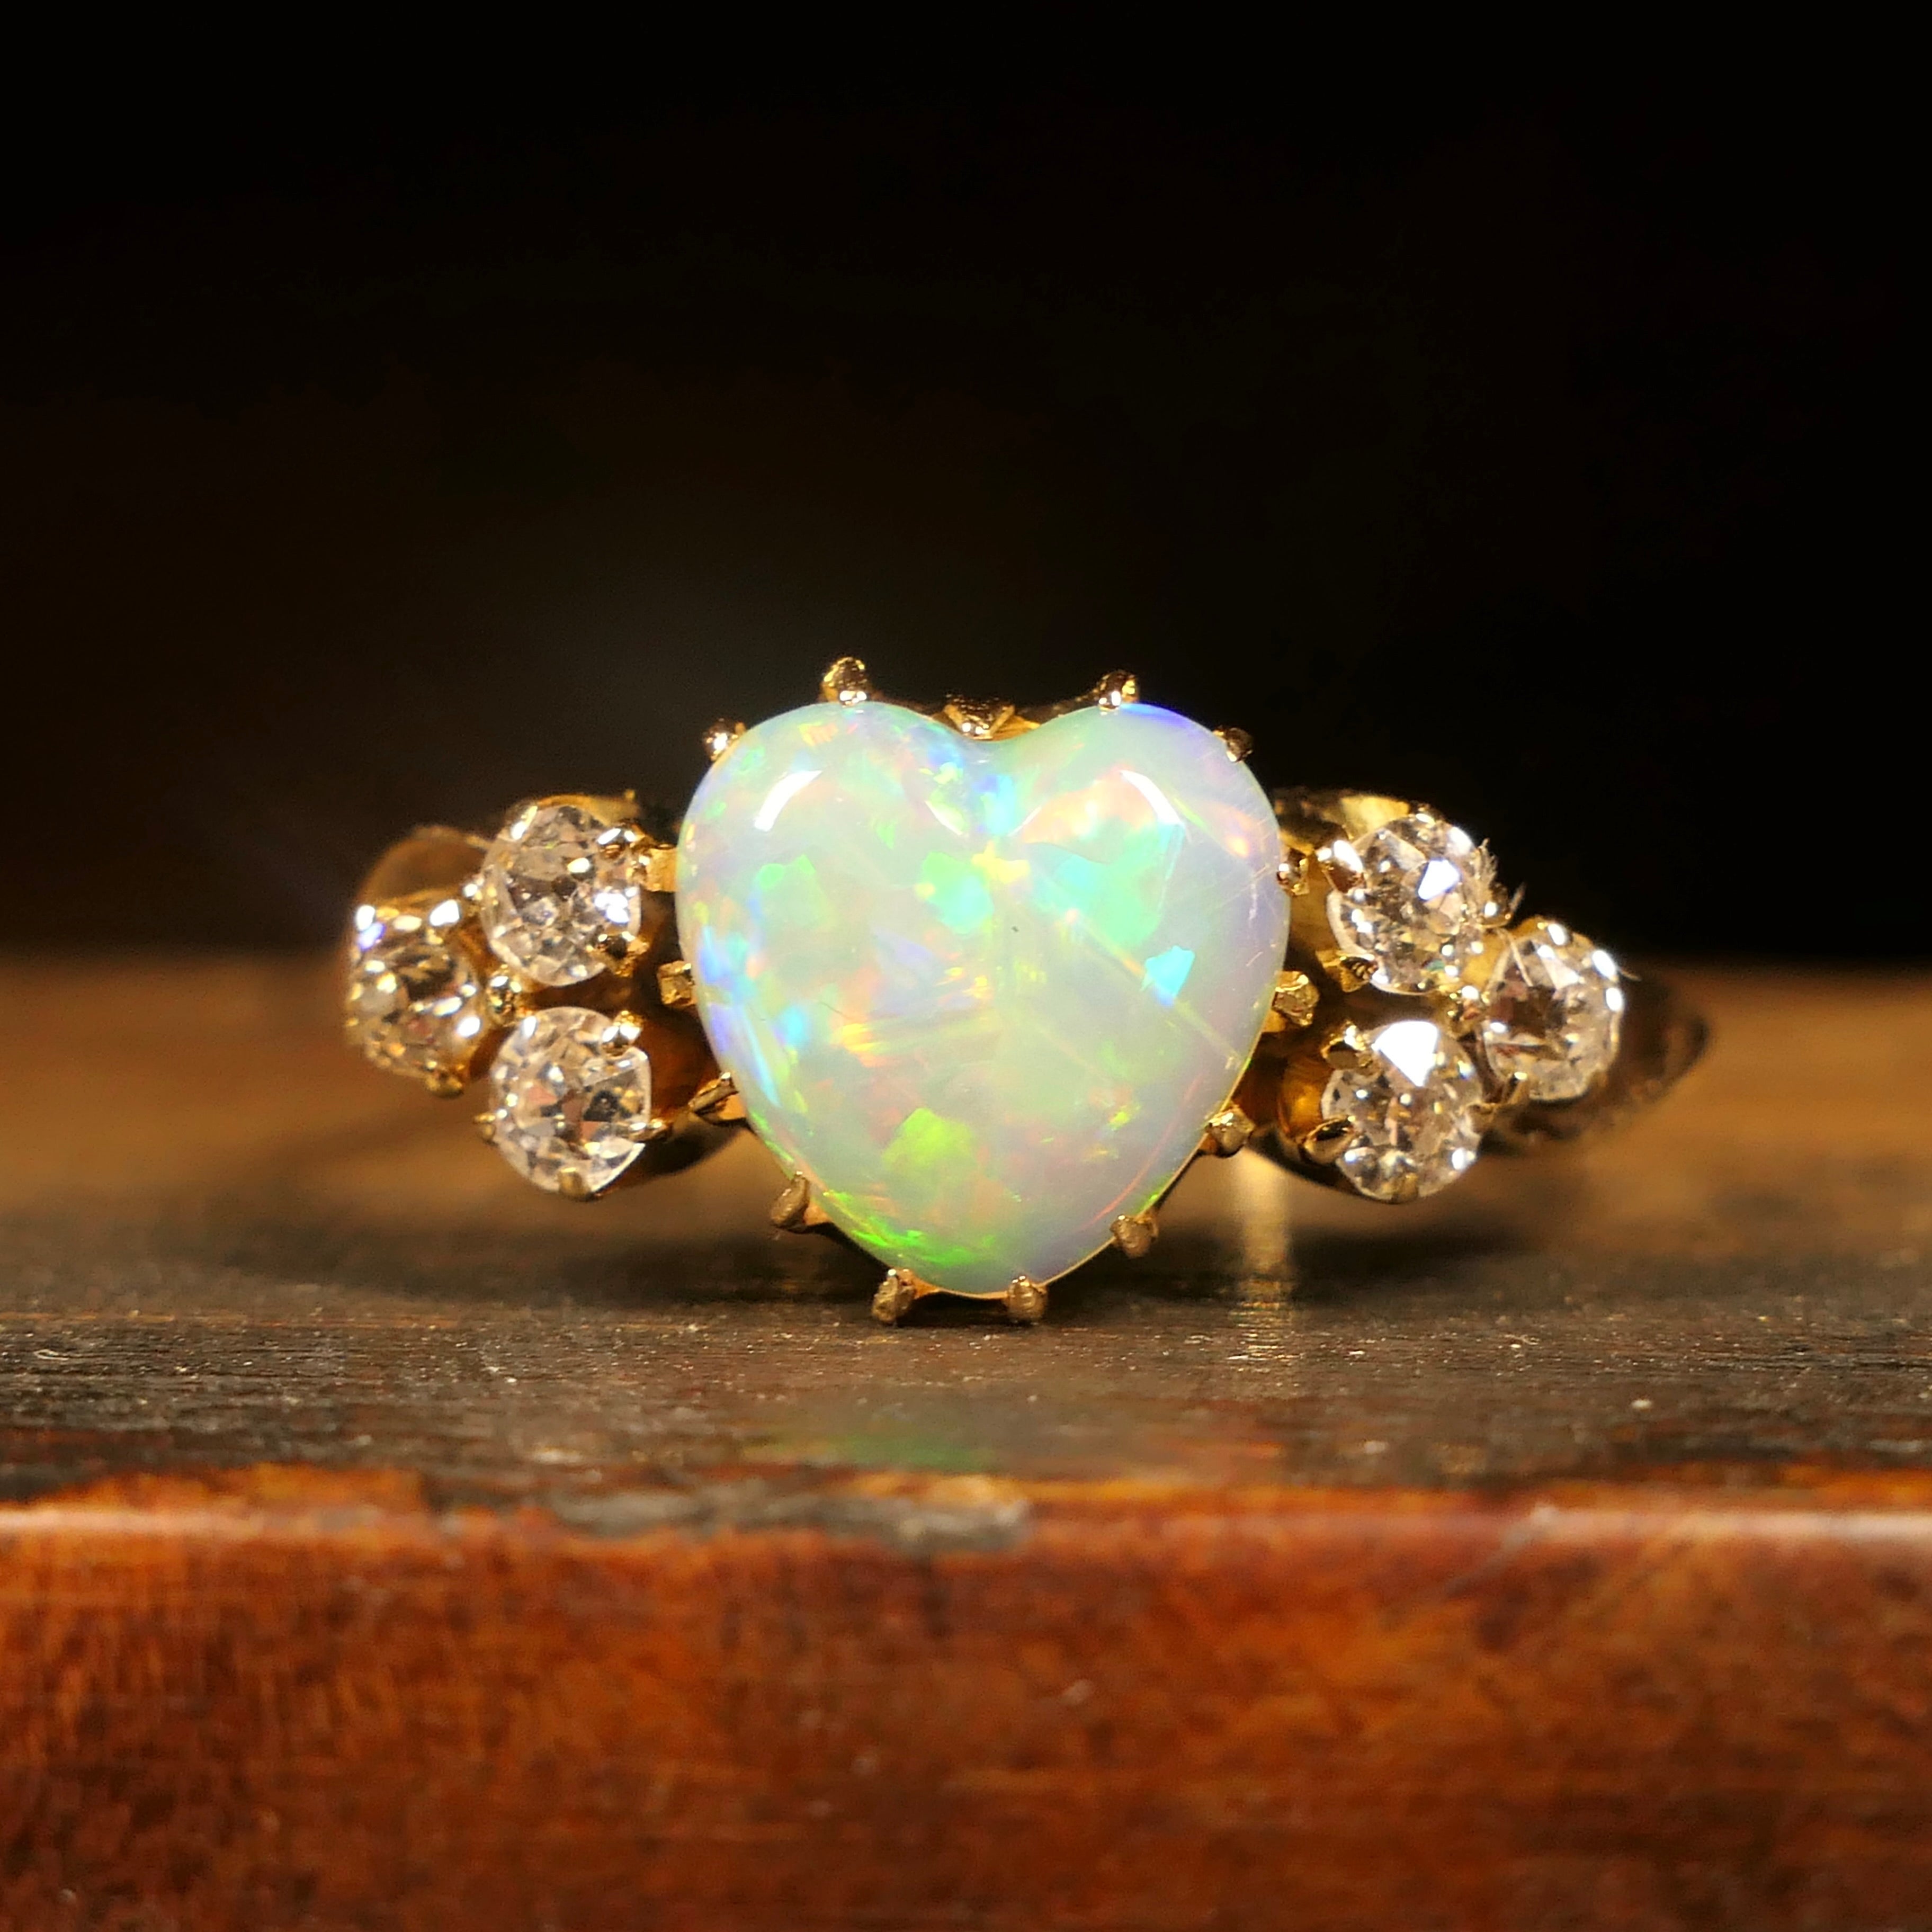 Edwardian Heart Opal & Old Cut Diamond, 18ct Gold ring, Chester hallmark 1902, In Antique Heart Ring Box